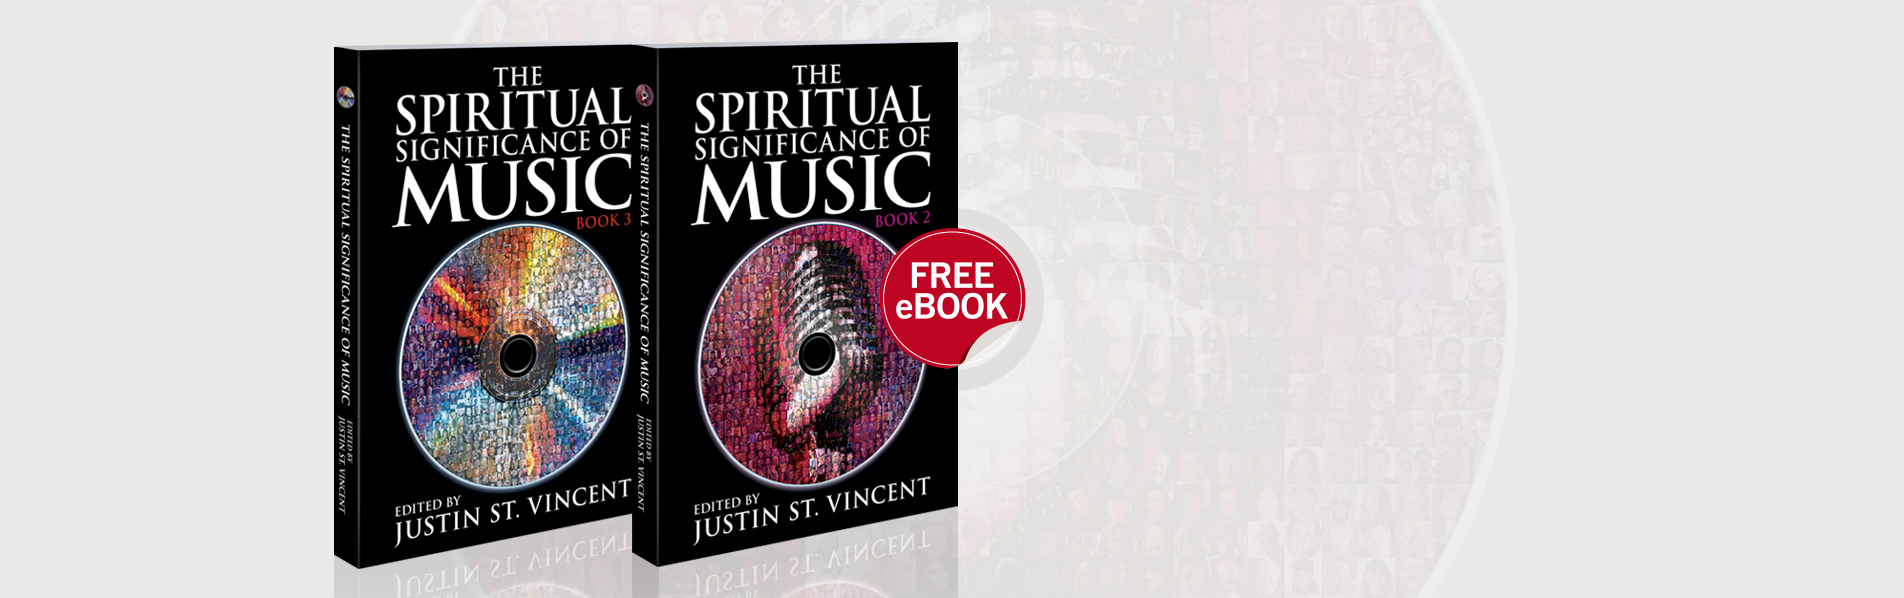 THE SPIRITUAL SIGNIFICANCE OF MUSIC: BOOKS 2 & 3